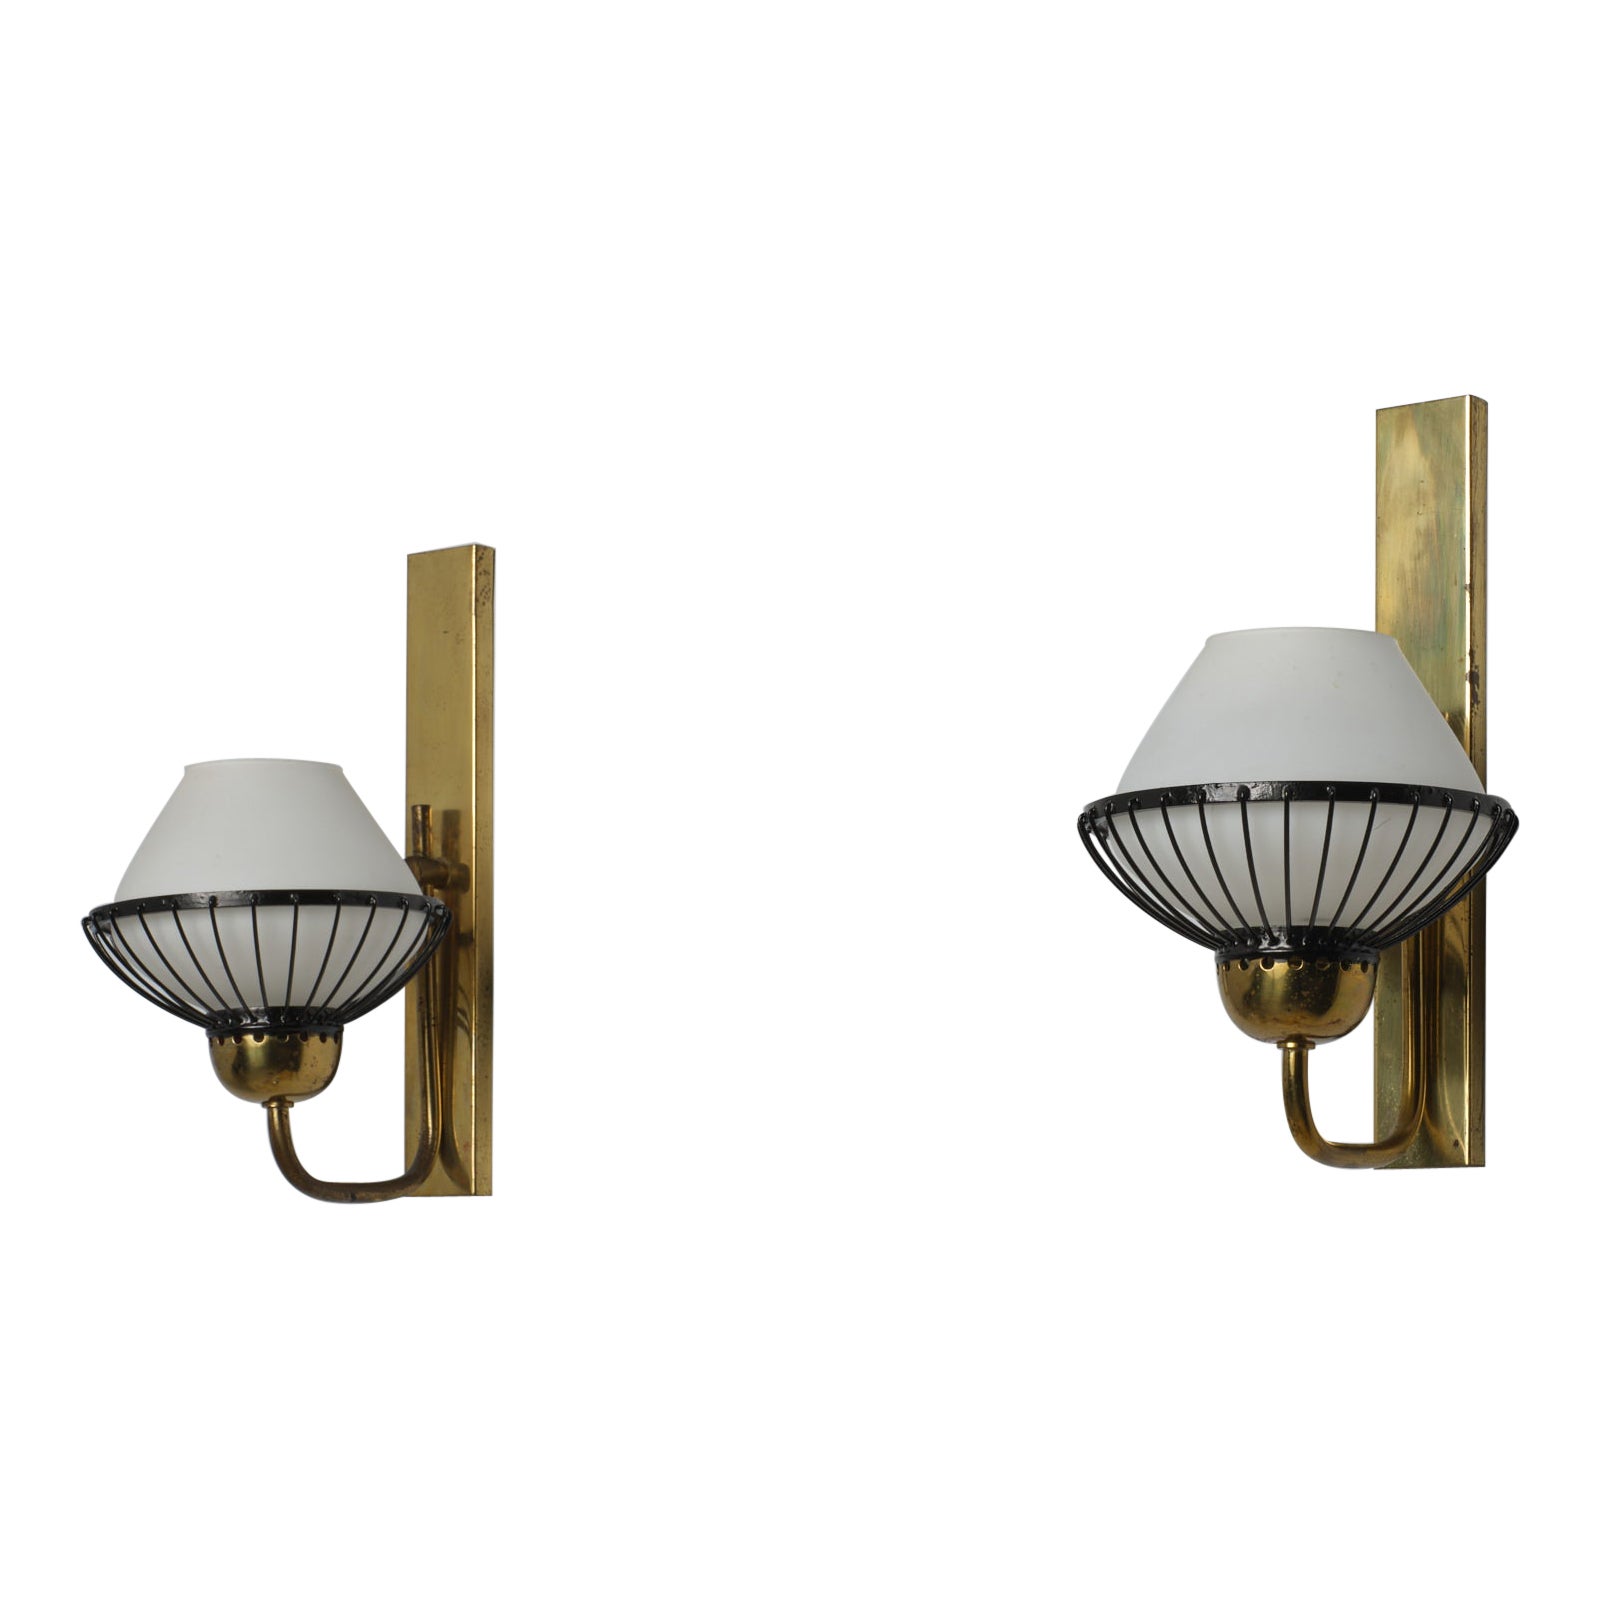  Midcentury Italian Appliques 1950s Elegance in Brass and Opal Glass